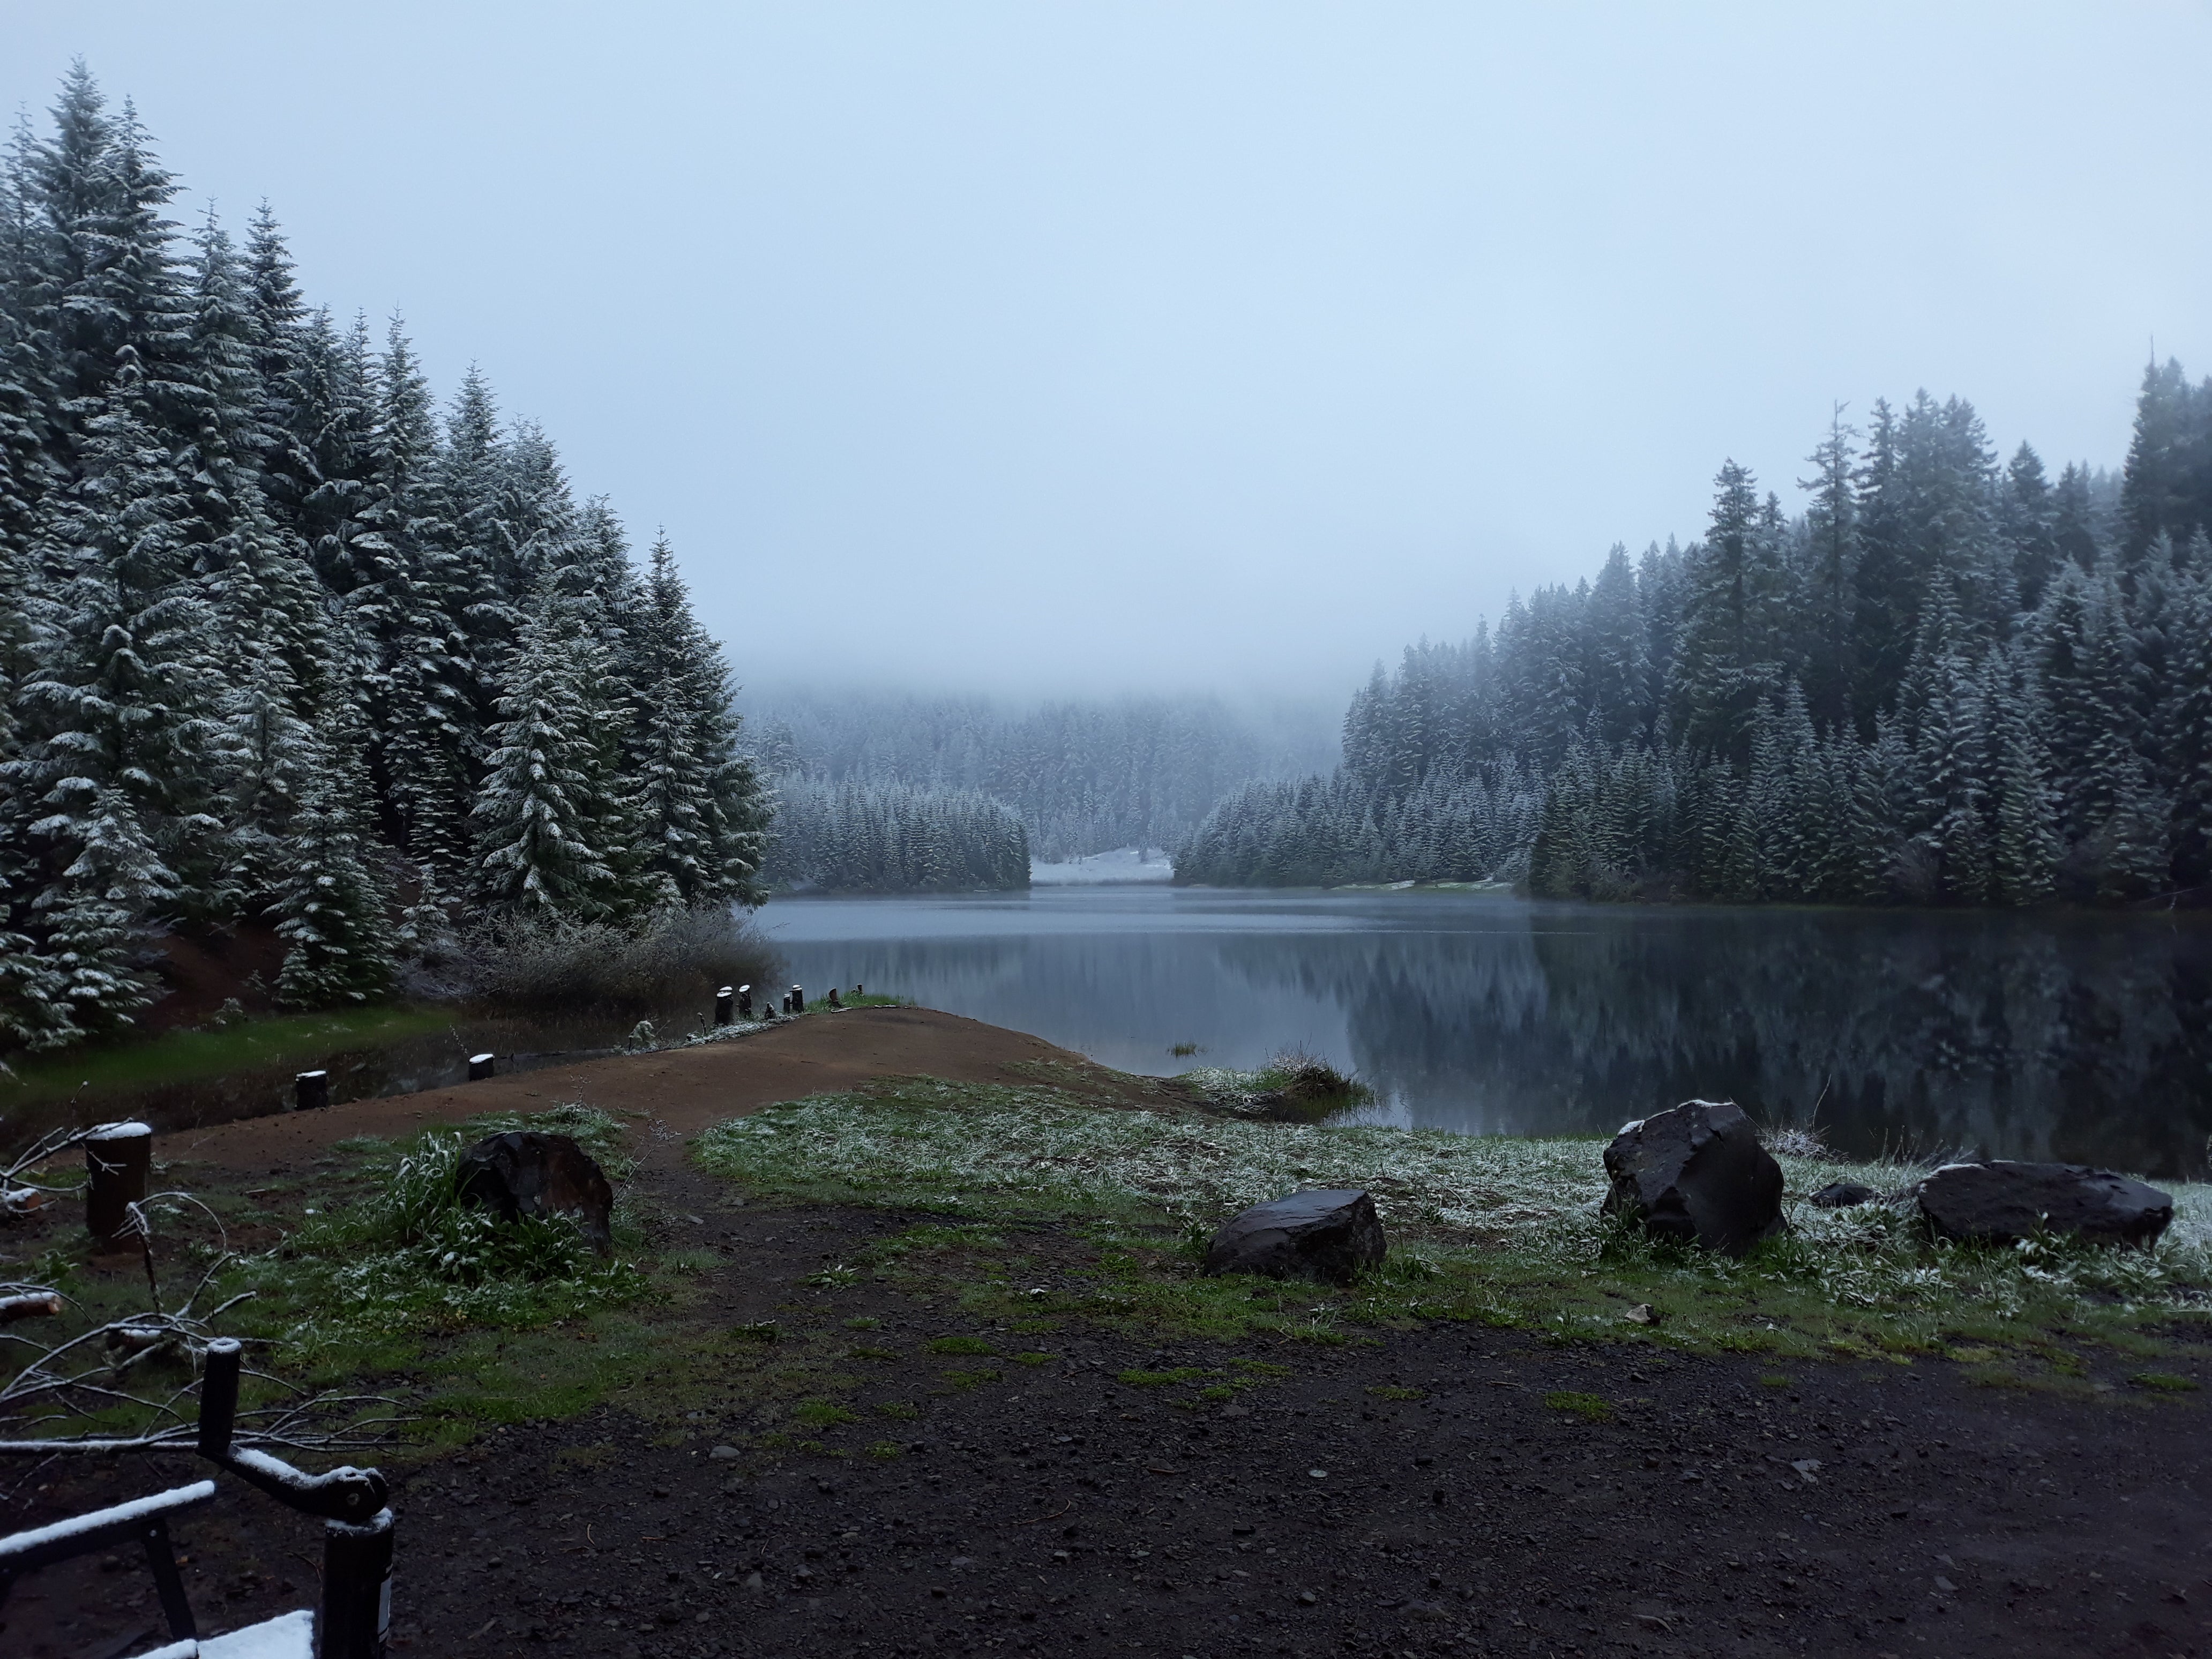 Camper submitted image from Hemlock Lake - 5